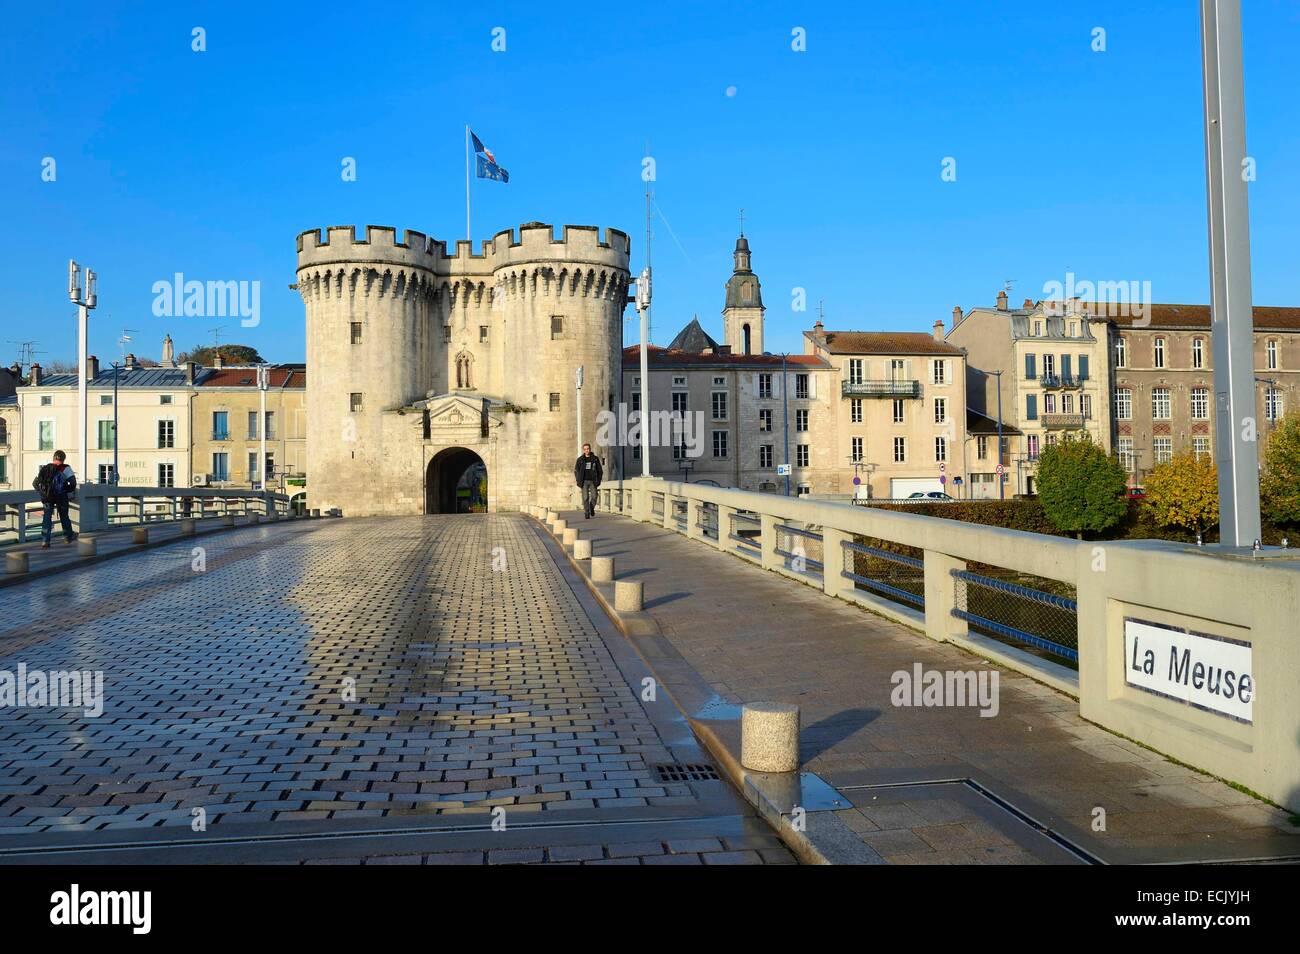 France, Meuse, Verdun, Porte Chaussee, gate of the 15th century, official  entry of the city since its construction, defense tower of the great wall  that encircled the city in the medieval seen